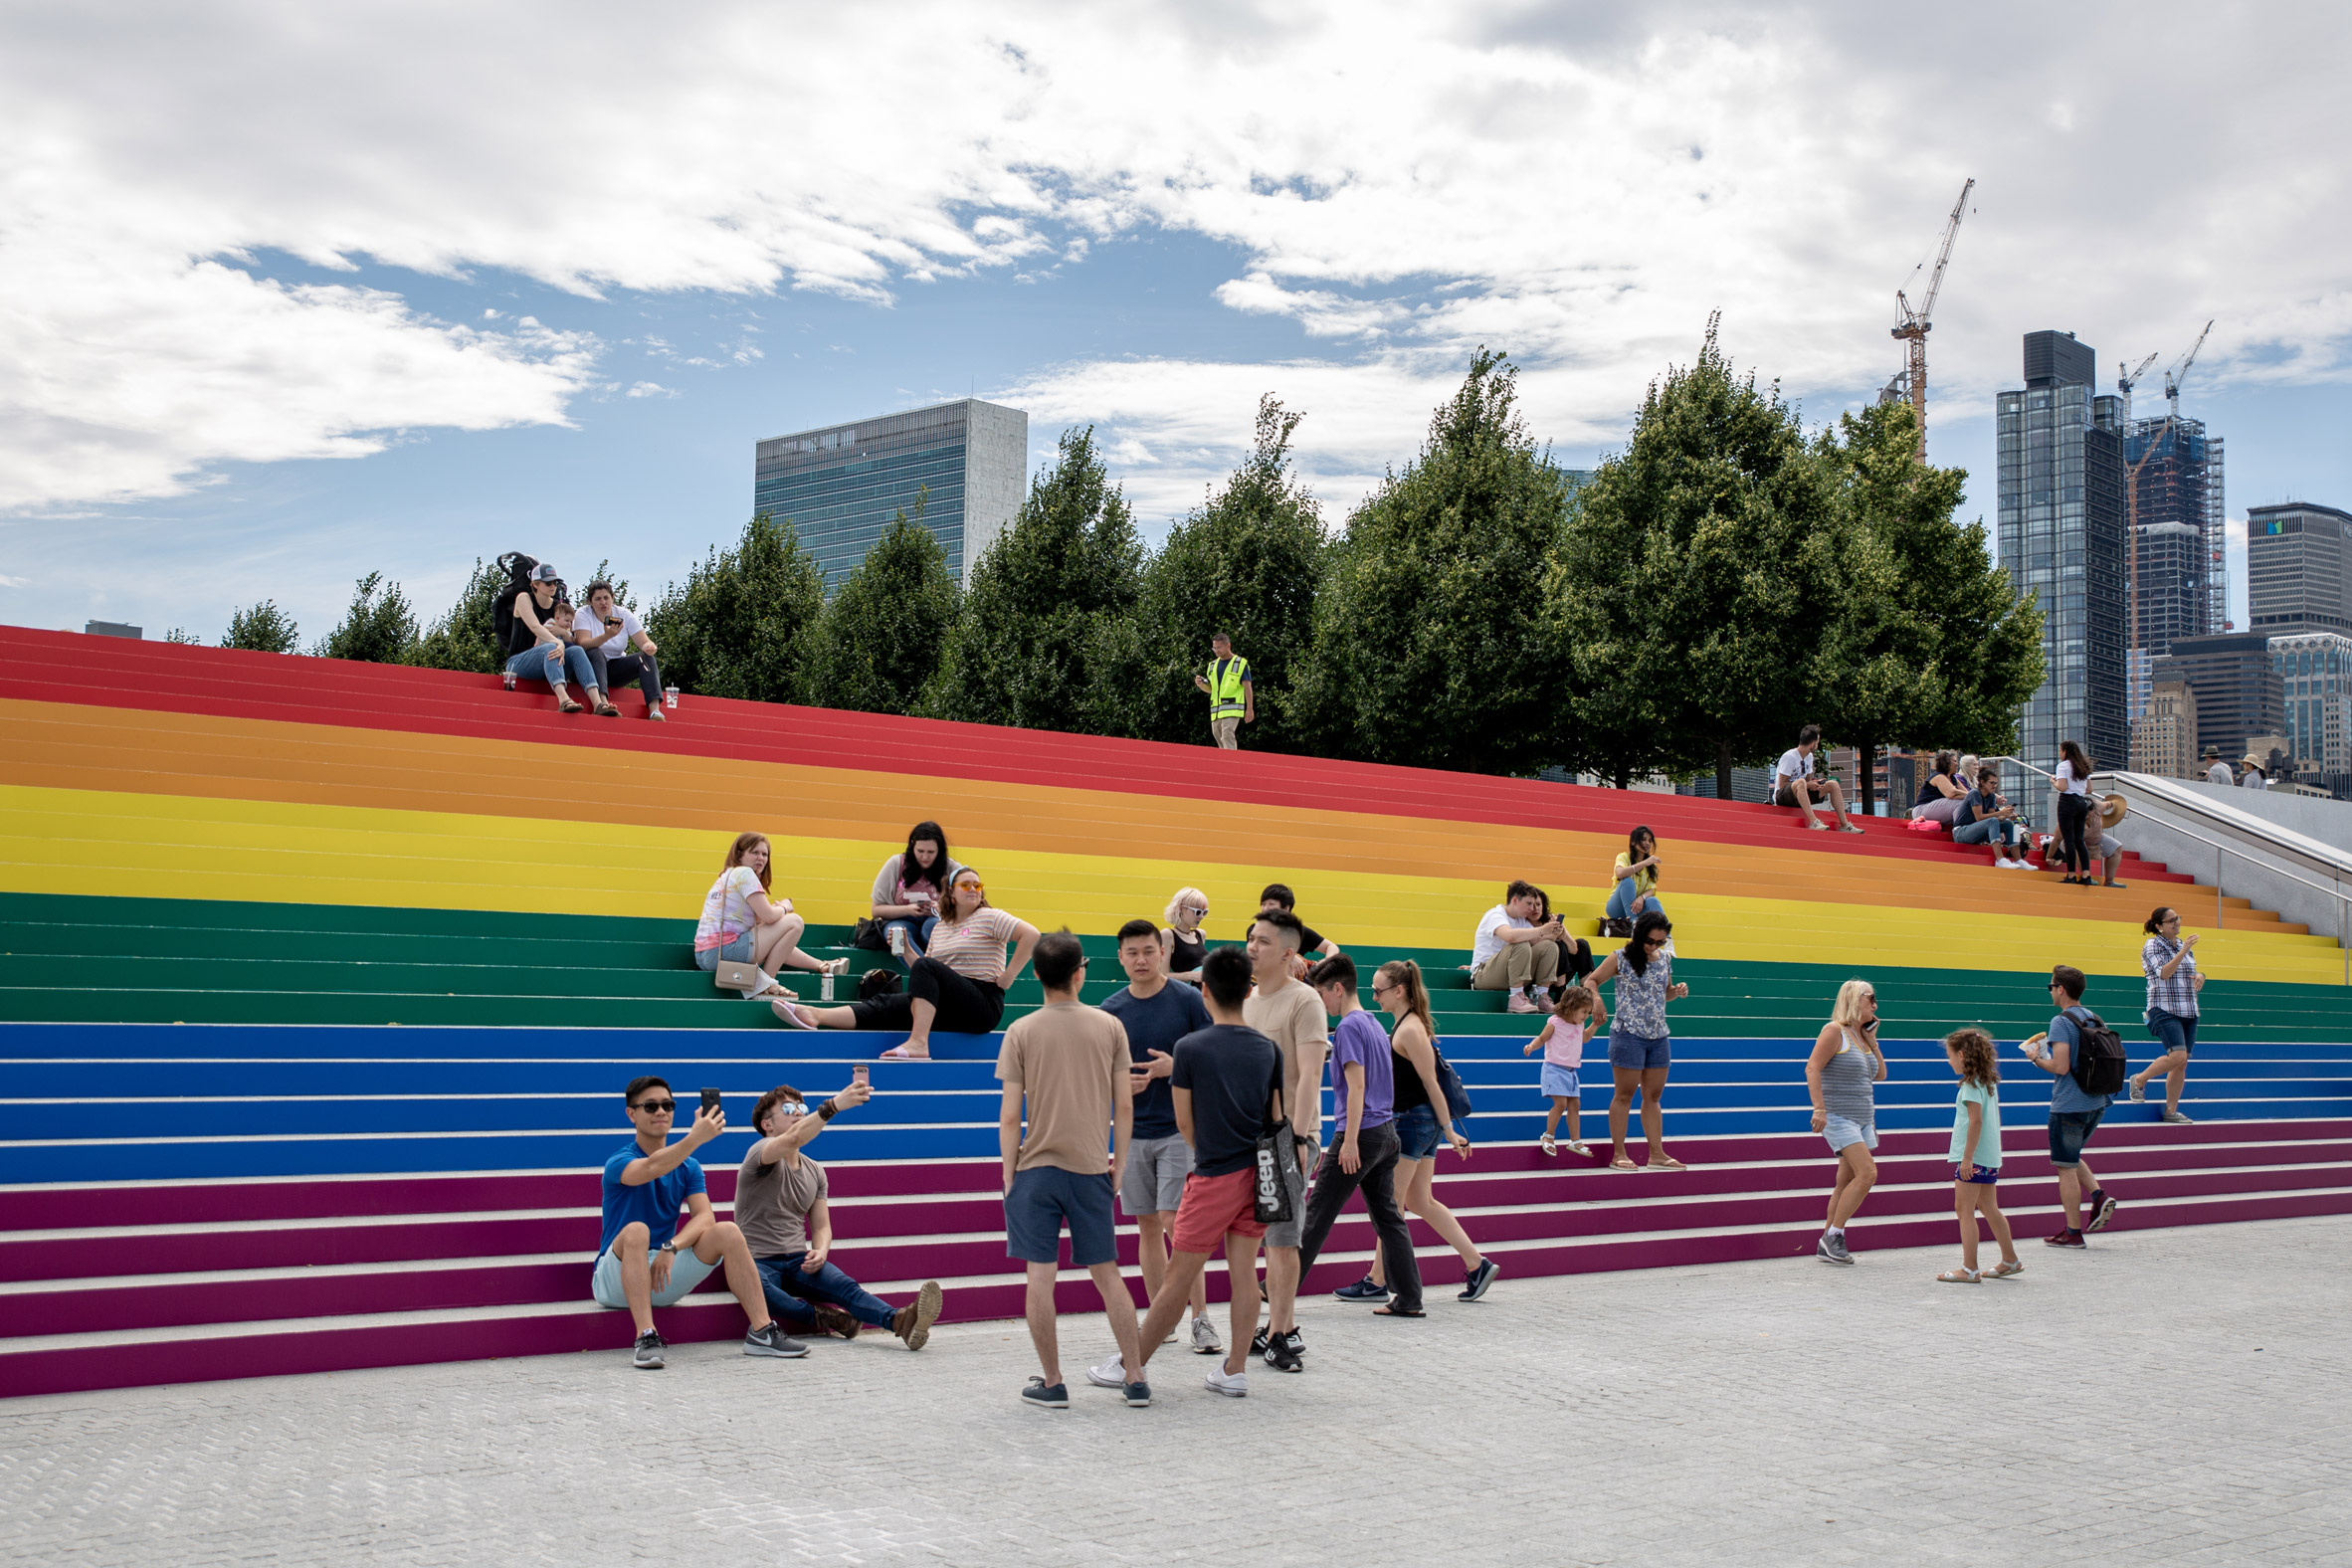 Ascend With Pride installation at Louis Kahn's Four Freedoms Park in New York City's Roosevelt Island